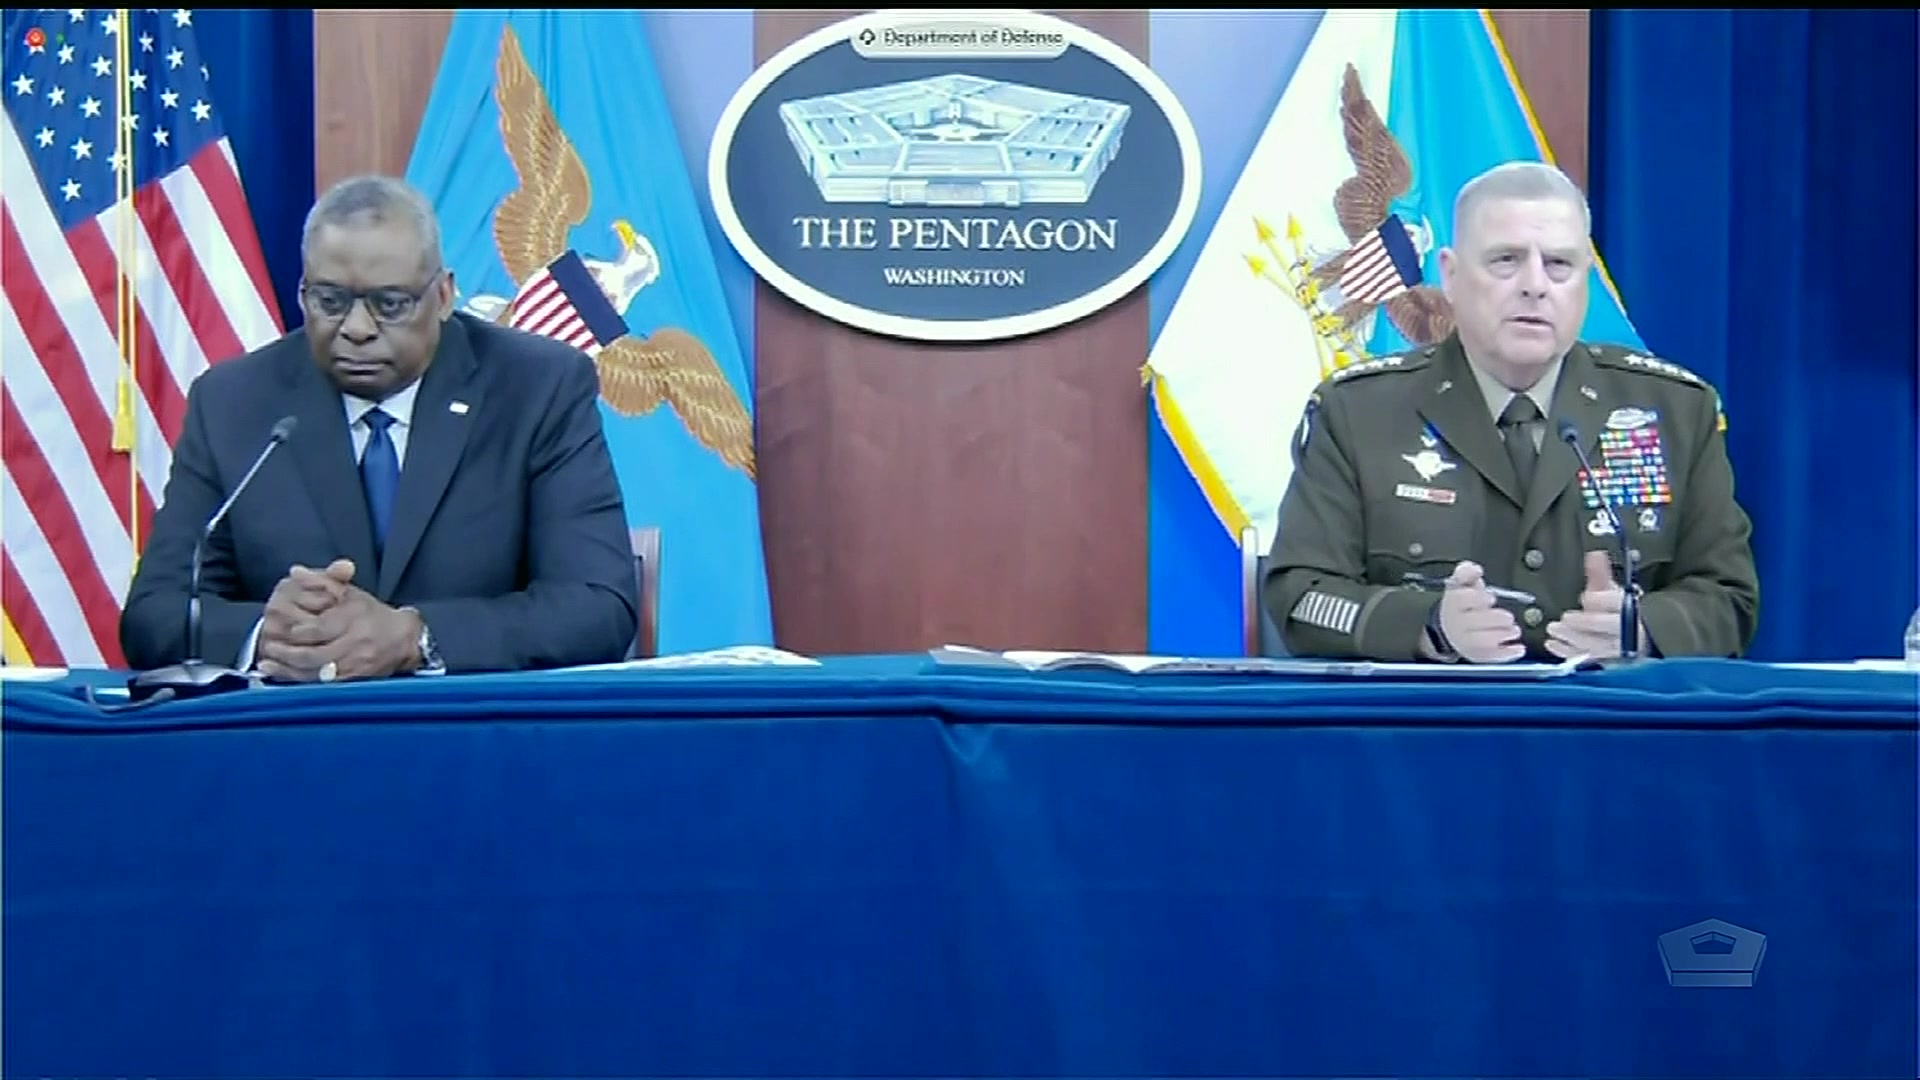 Secretary of Defense Lloyd J. Austin III and Army Gen. Mark A. Milley, chairman of the Joint Chiefs of Staff, testify before the House Appropriations Committee's Subcommittee on Defense regarding the Defense Department's fiscal year 2022 budget, May 27, 2021.